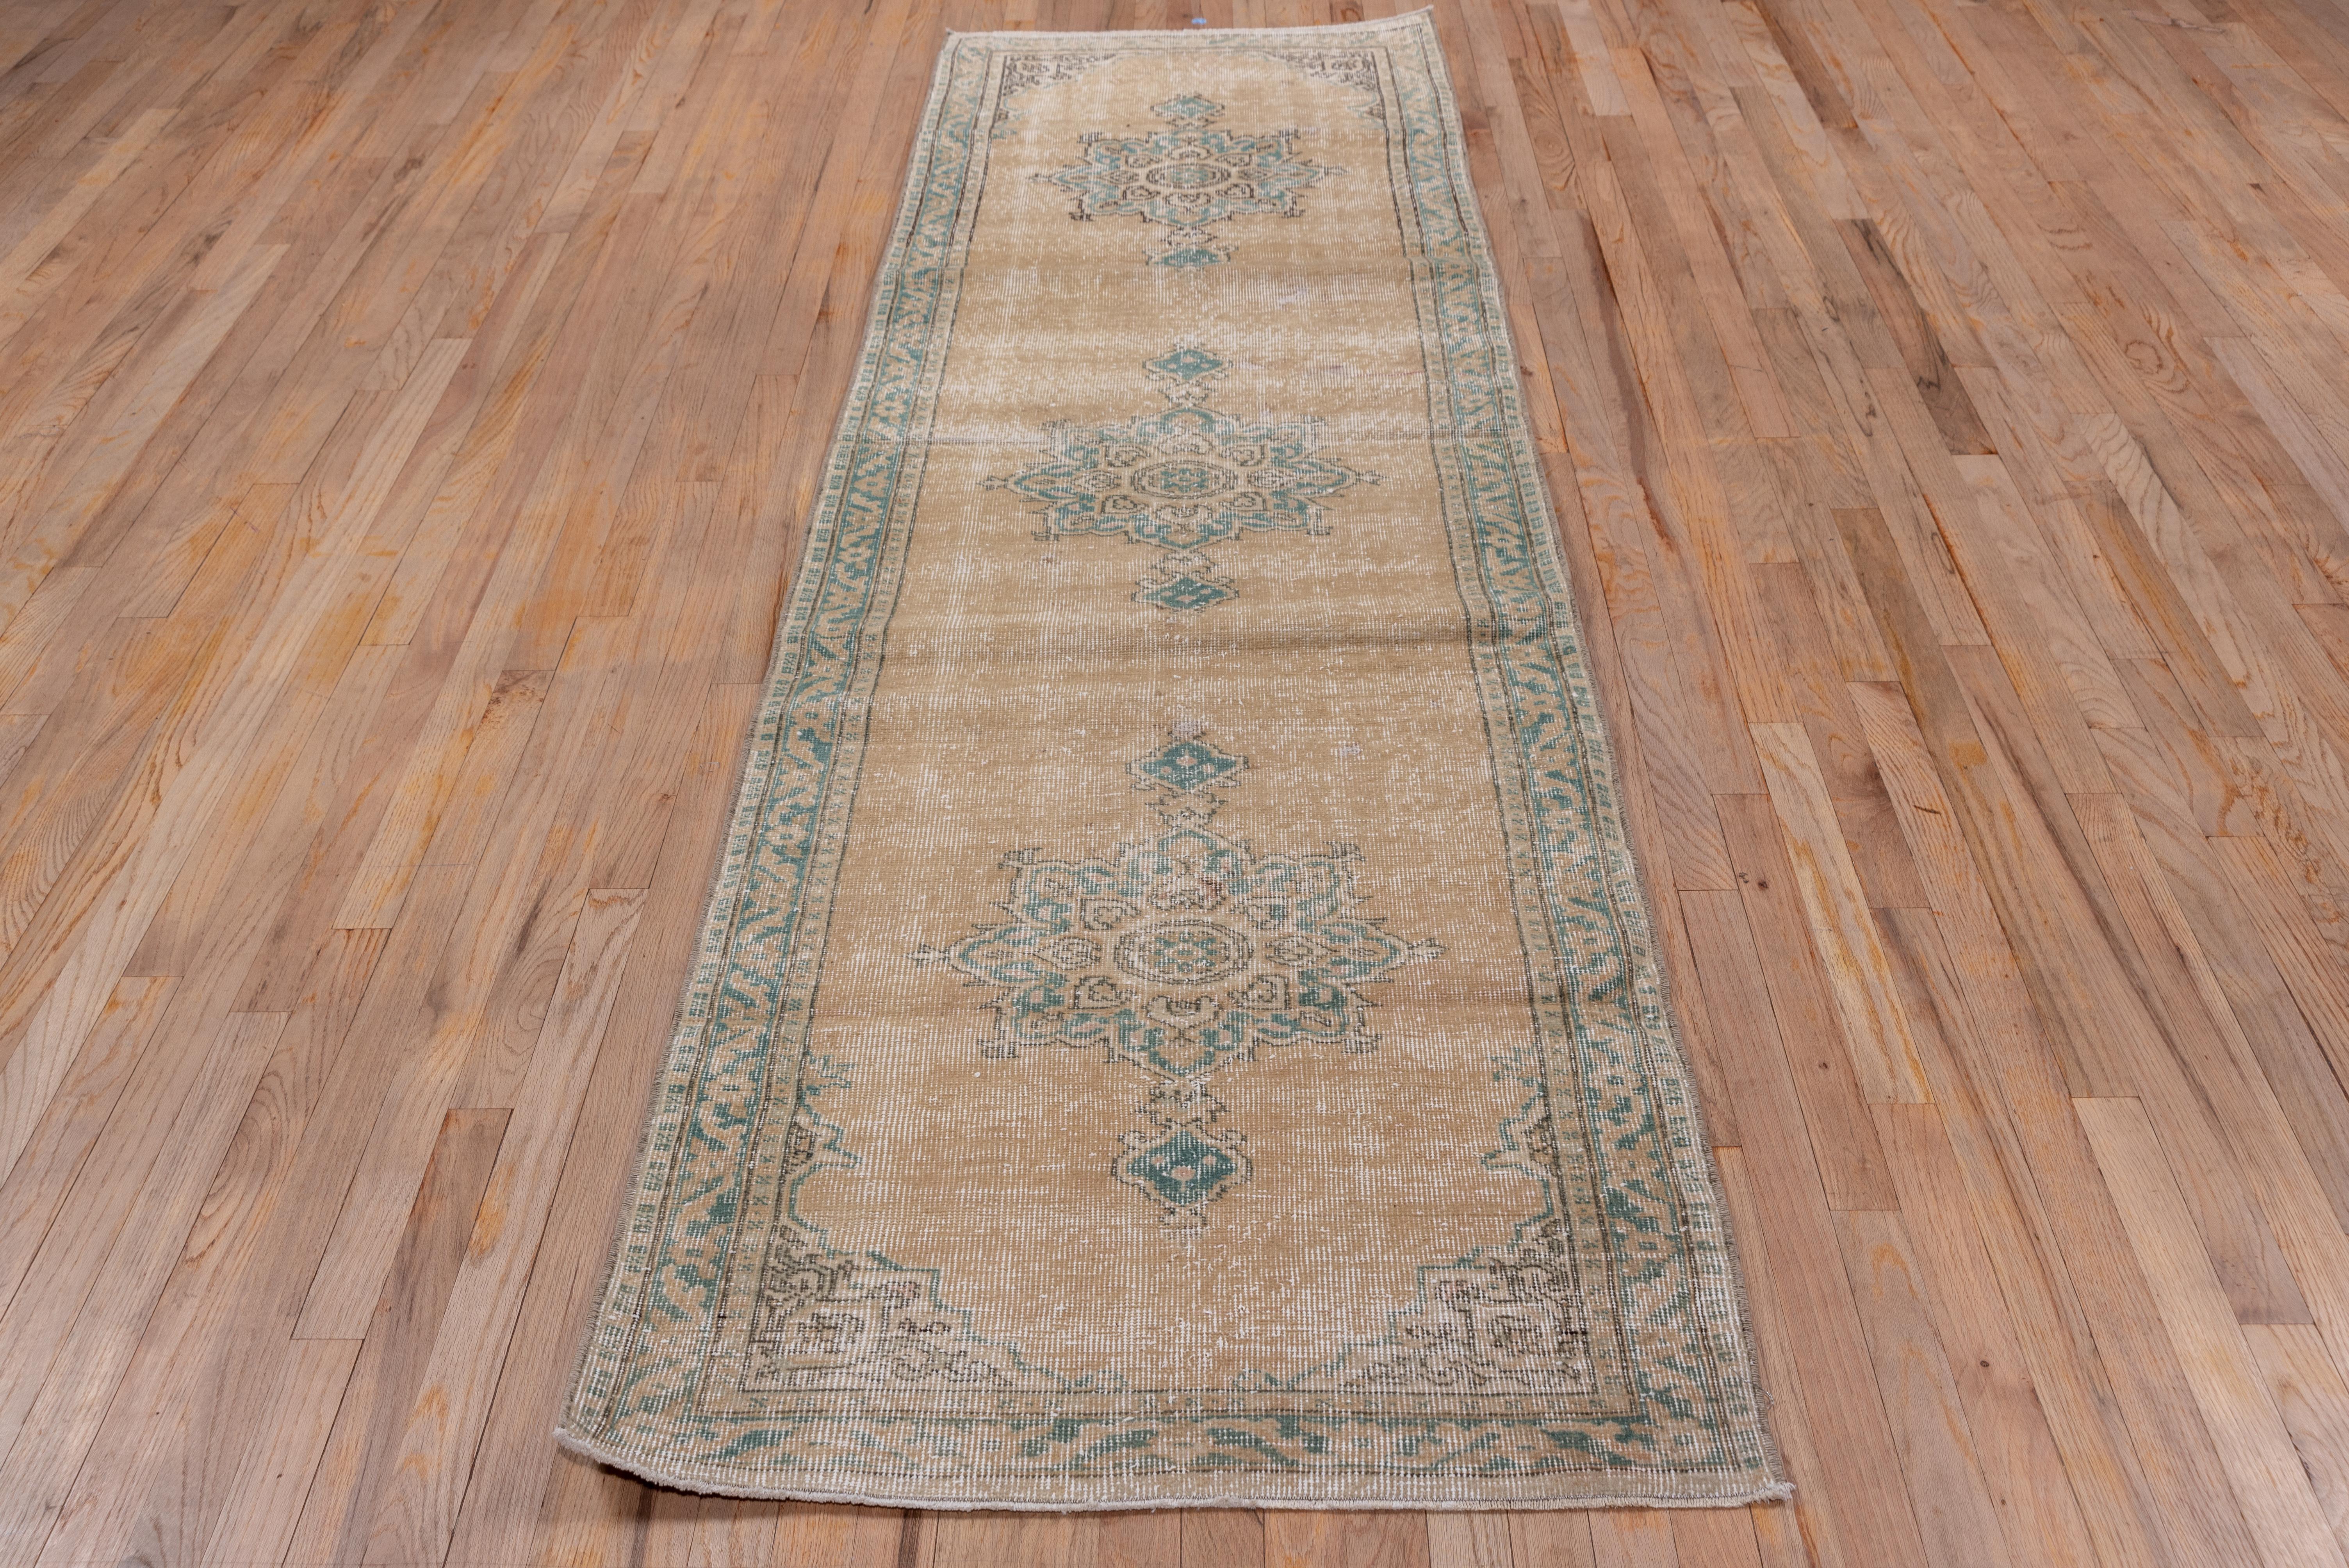 This distressed runner displays three pendanted grey-green octofoil medallions floating on an open almond ground with arabesque patterned beige corners. The grey-green narrow main border displays a stencil patterned broad vine.